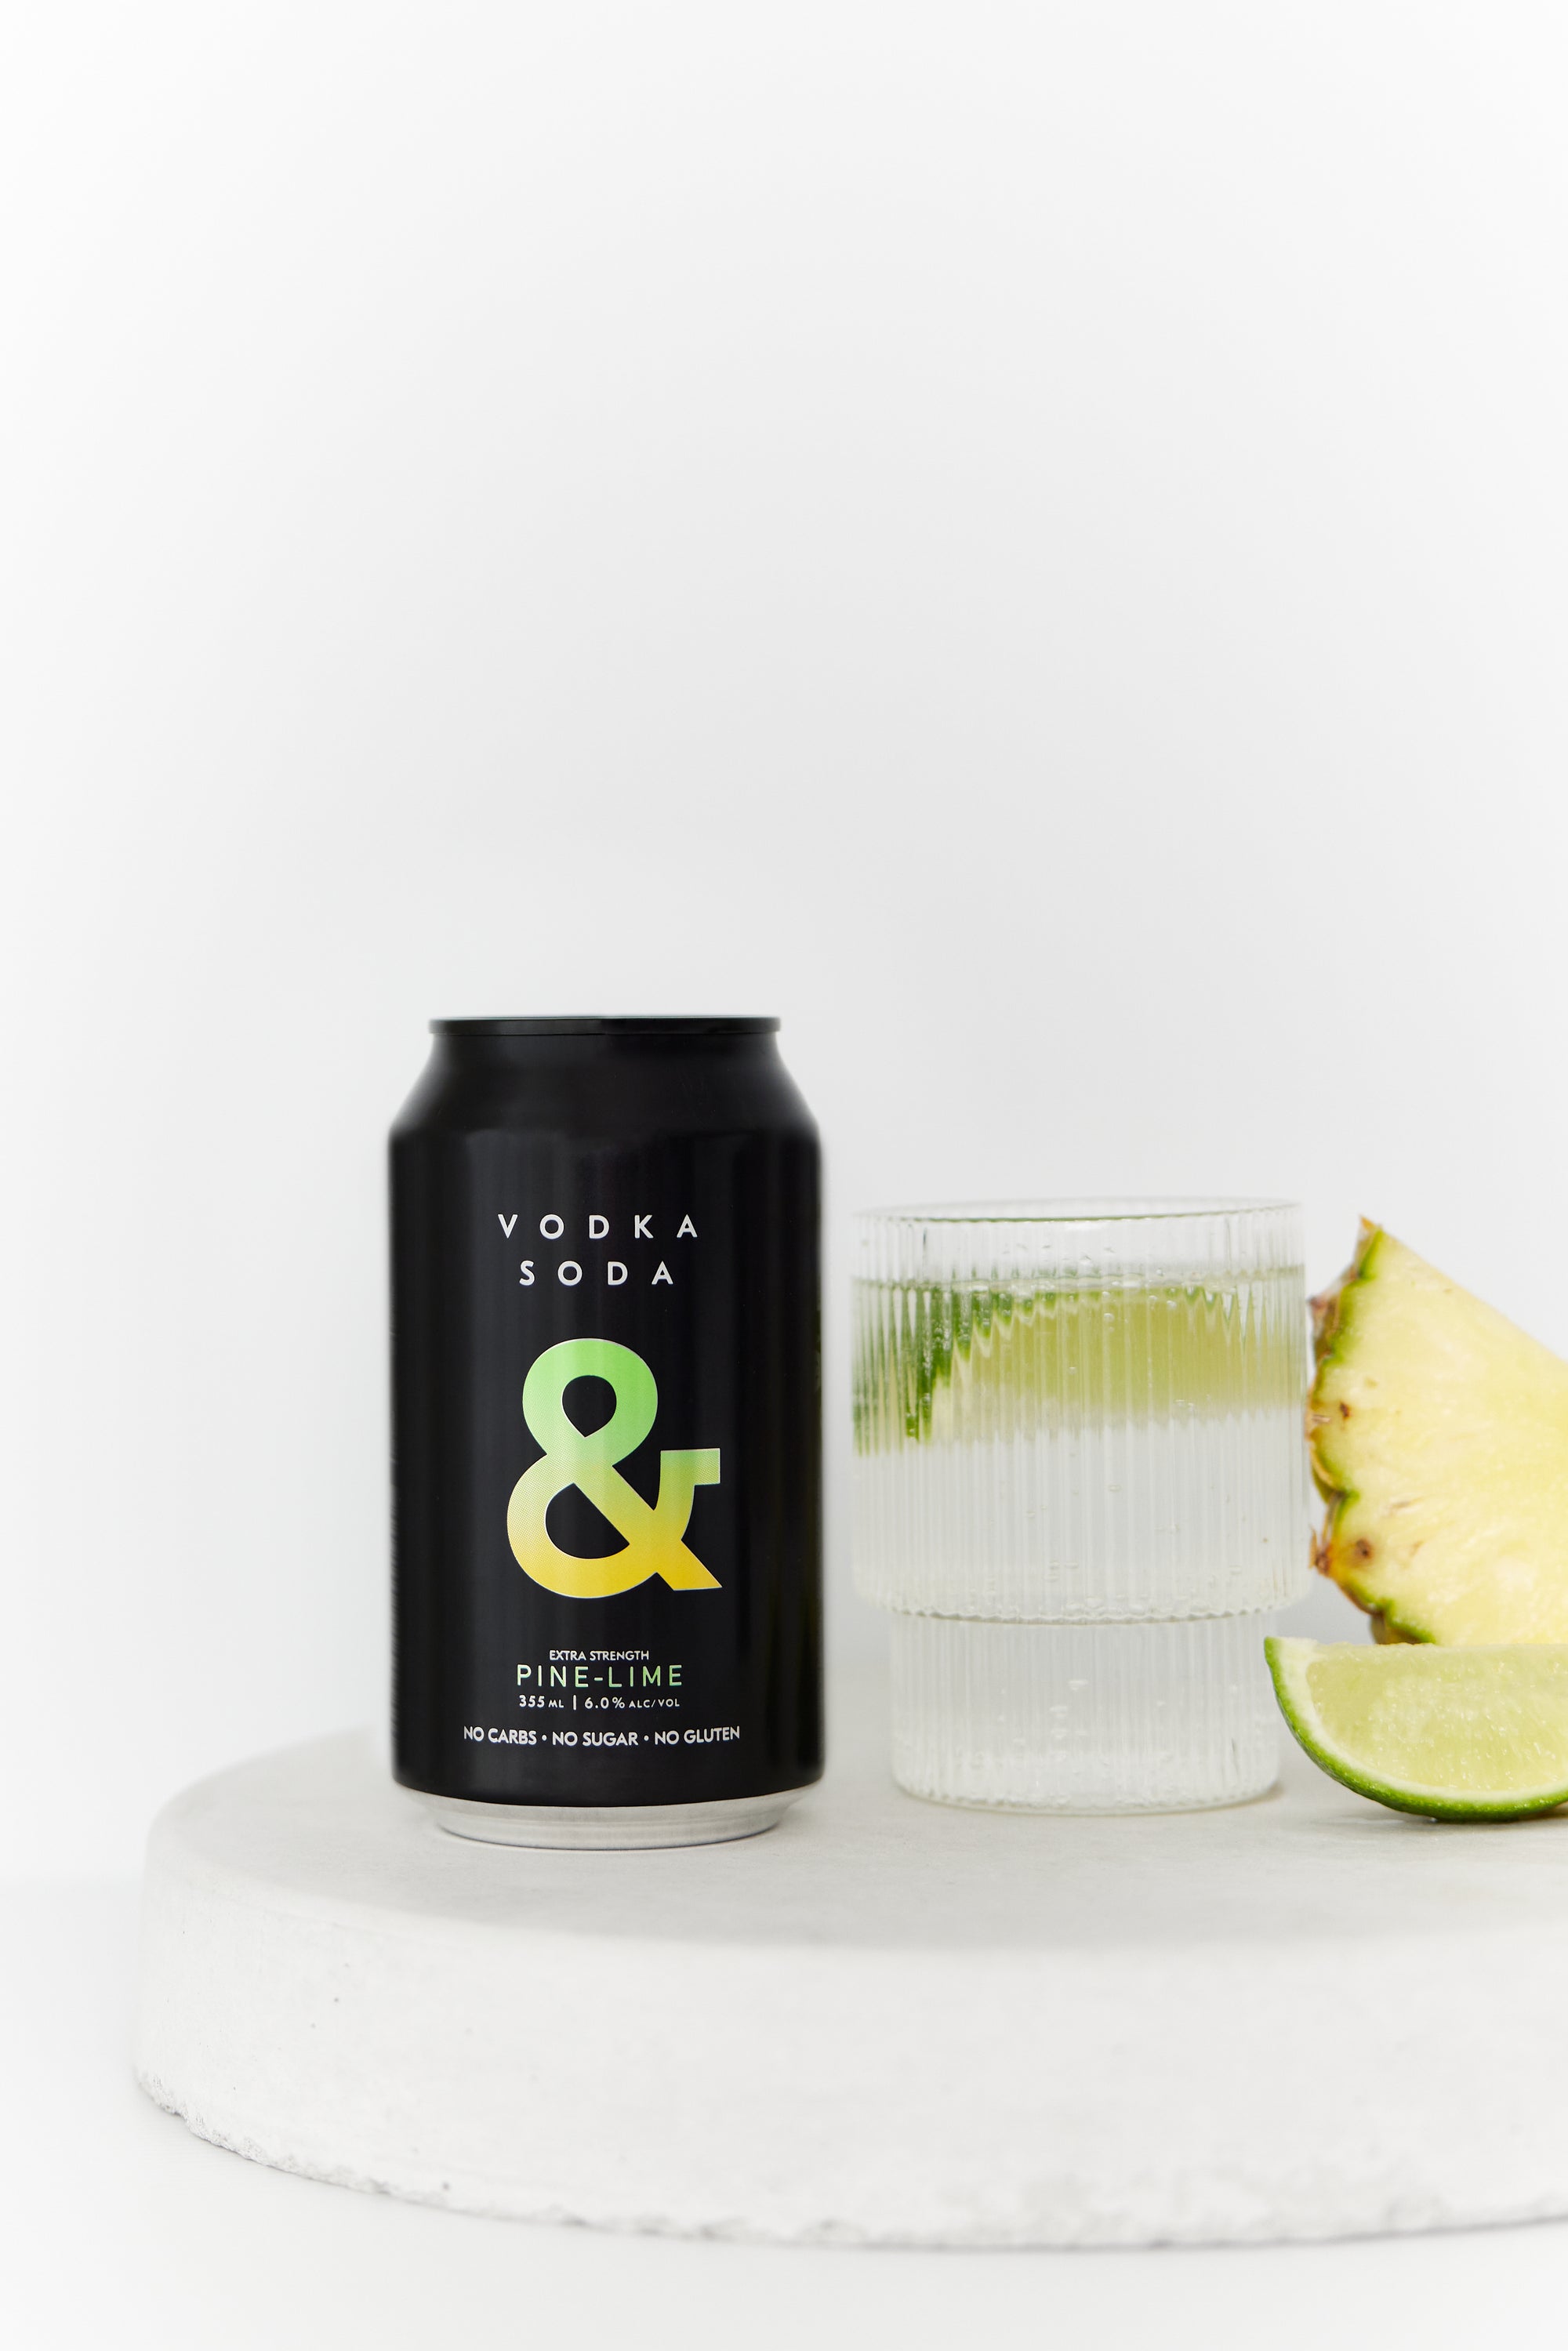 Vodka Soda & Pine Lime Cans 6.0% (16 Pack)